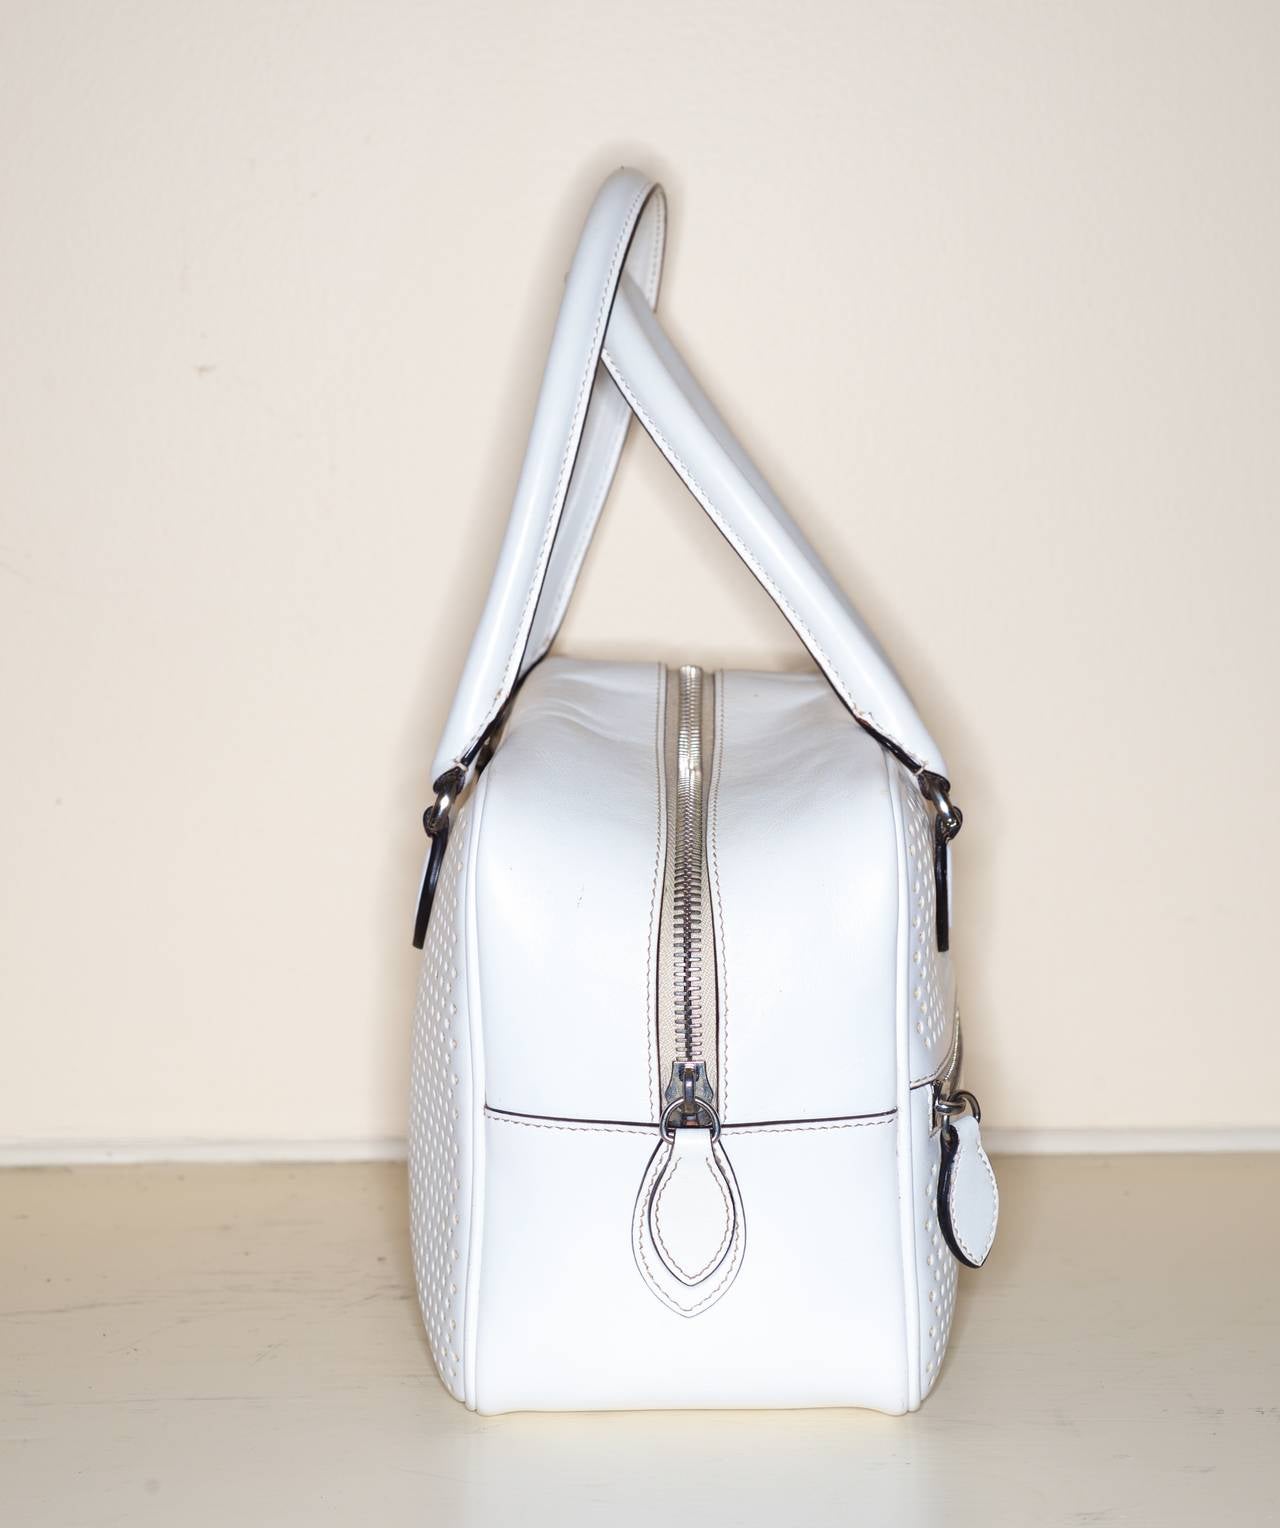 This Alaia white perforated leather tote is spacious and light .  

Exterior zipper pocket, Interior has a drawstring leather pouch and a detachable mirror.

Measurements: 
nearly 11